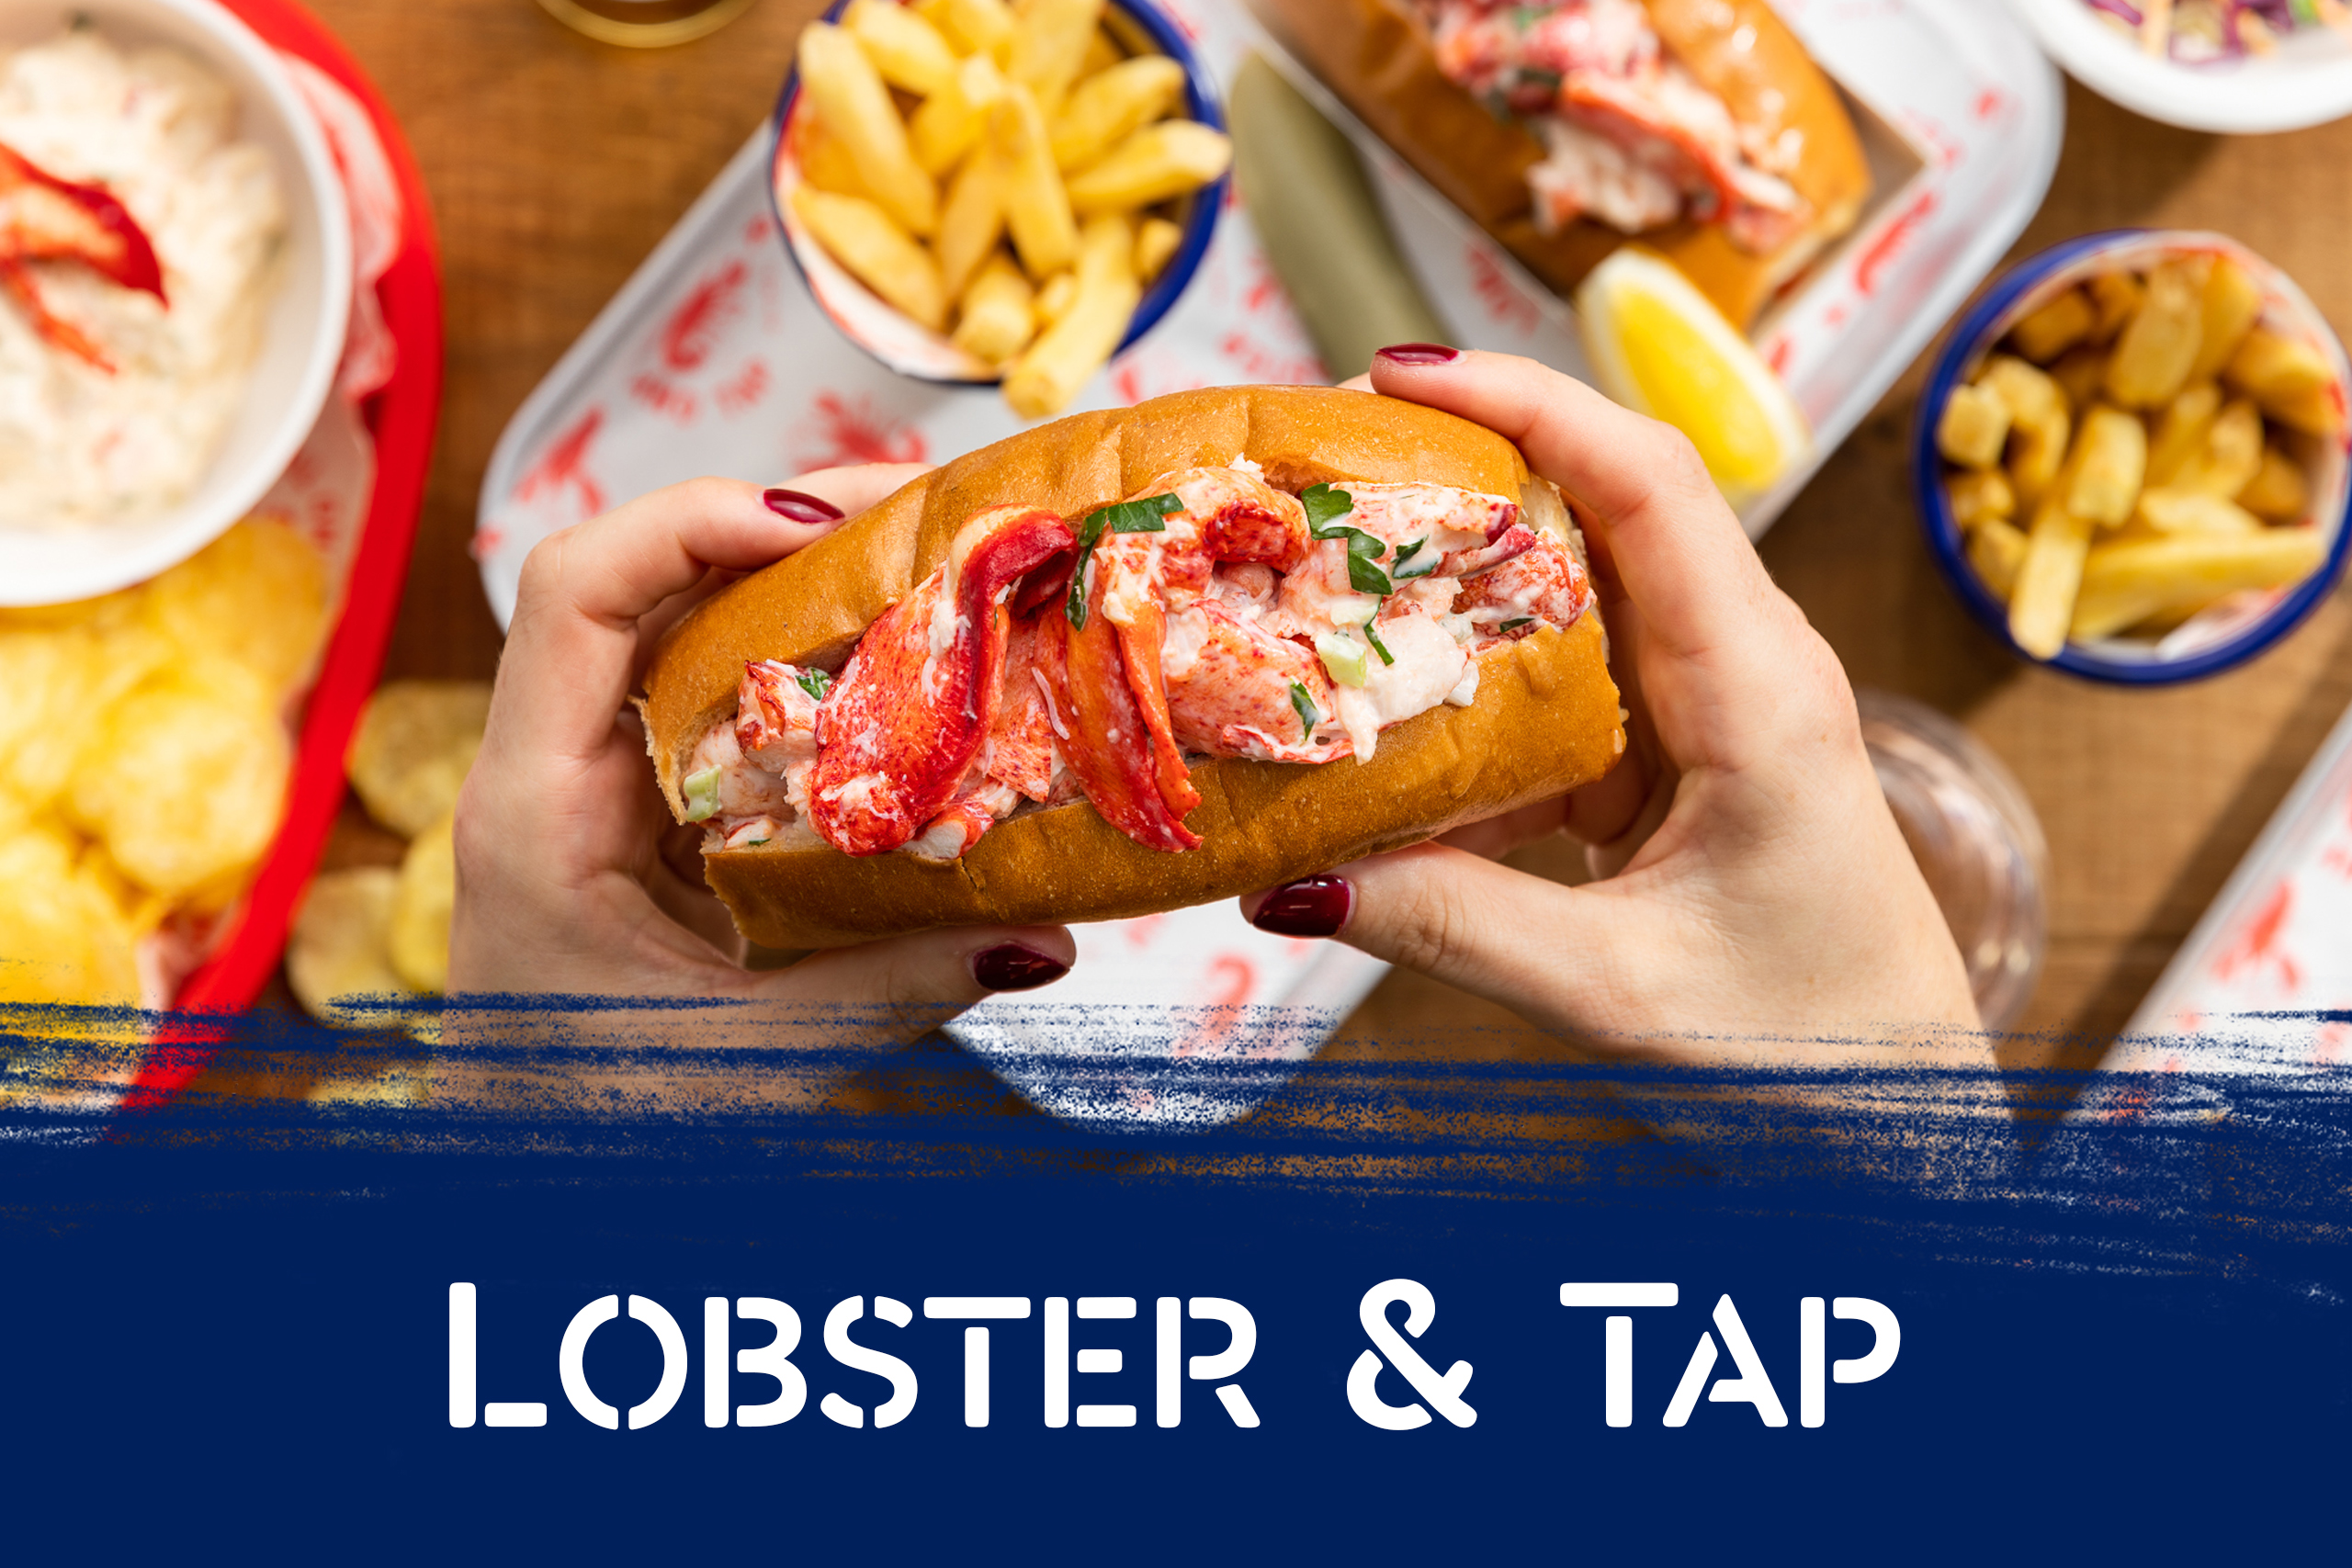 Lobster and tap at Auckland Fish Market